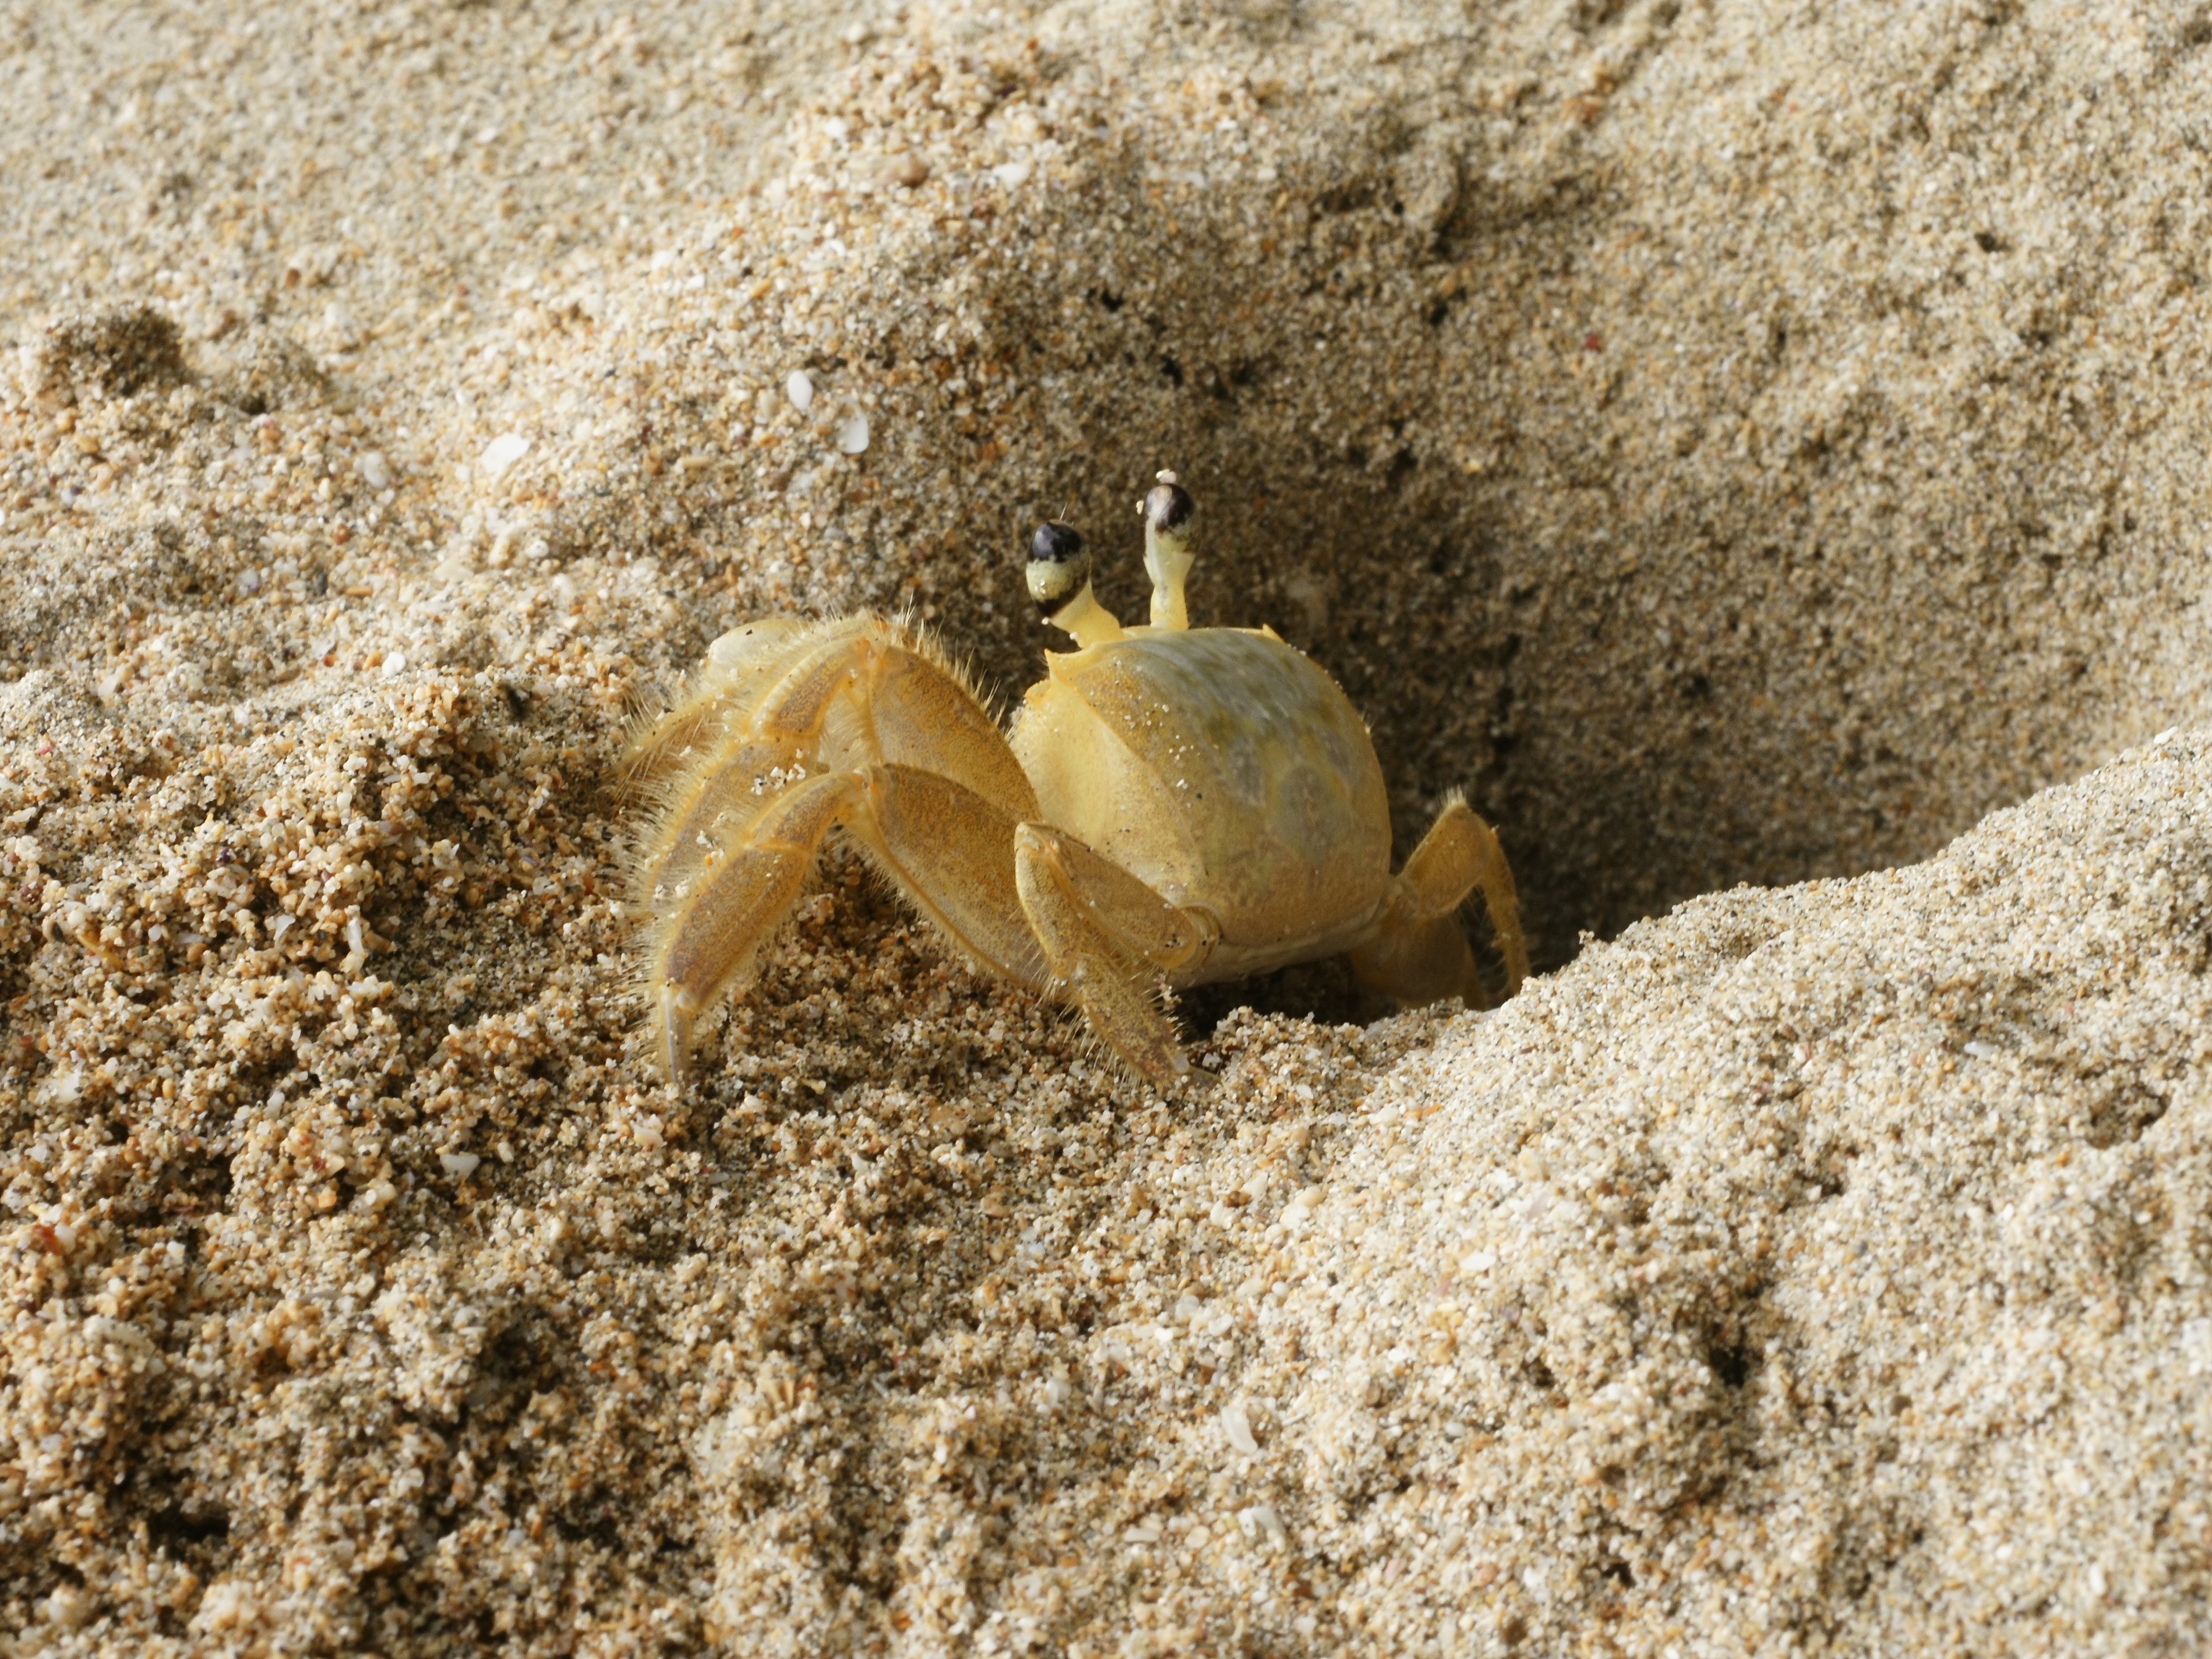 Picture of a crab digging a hole in the sand